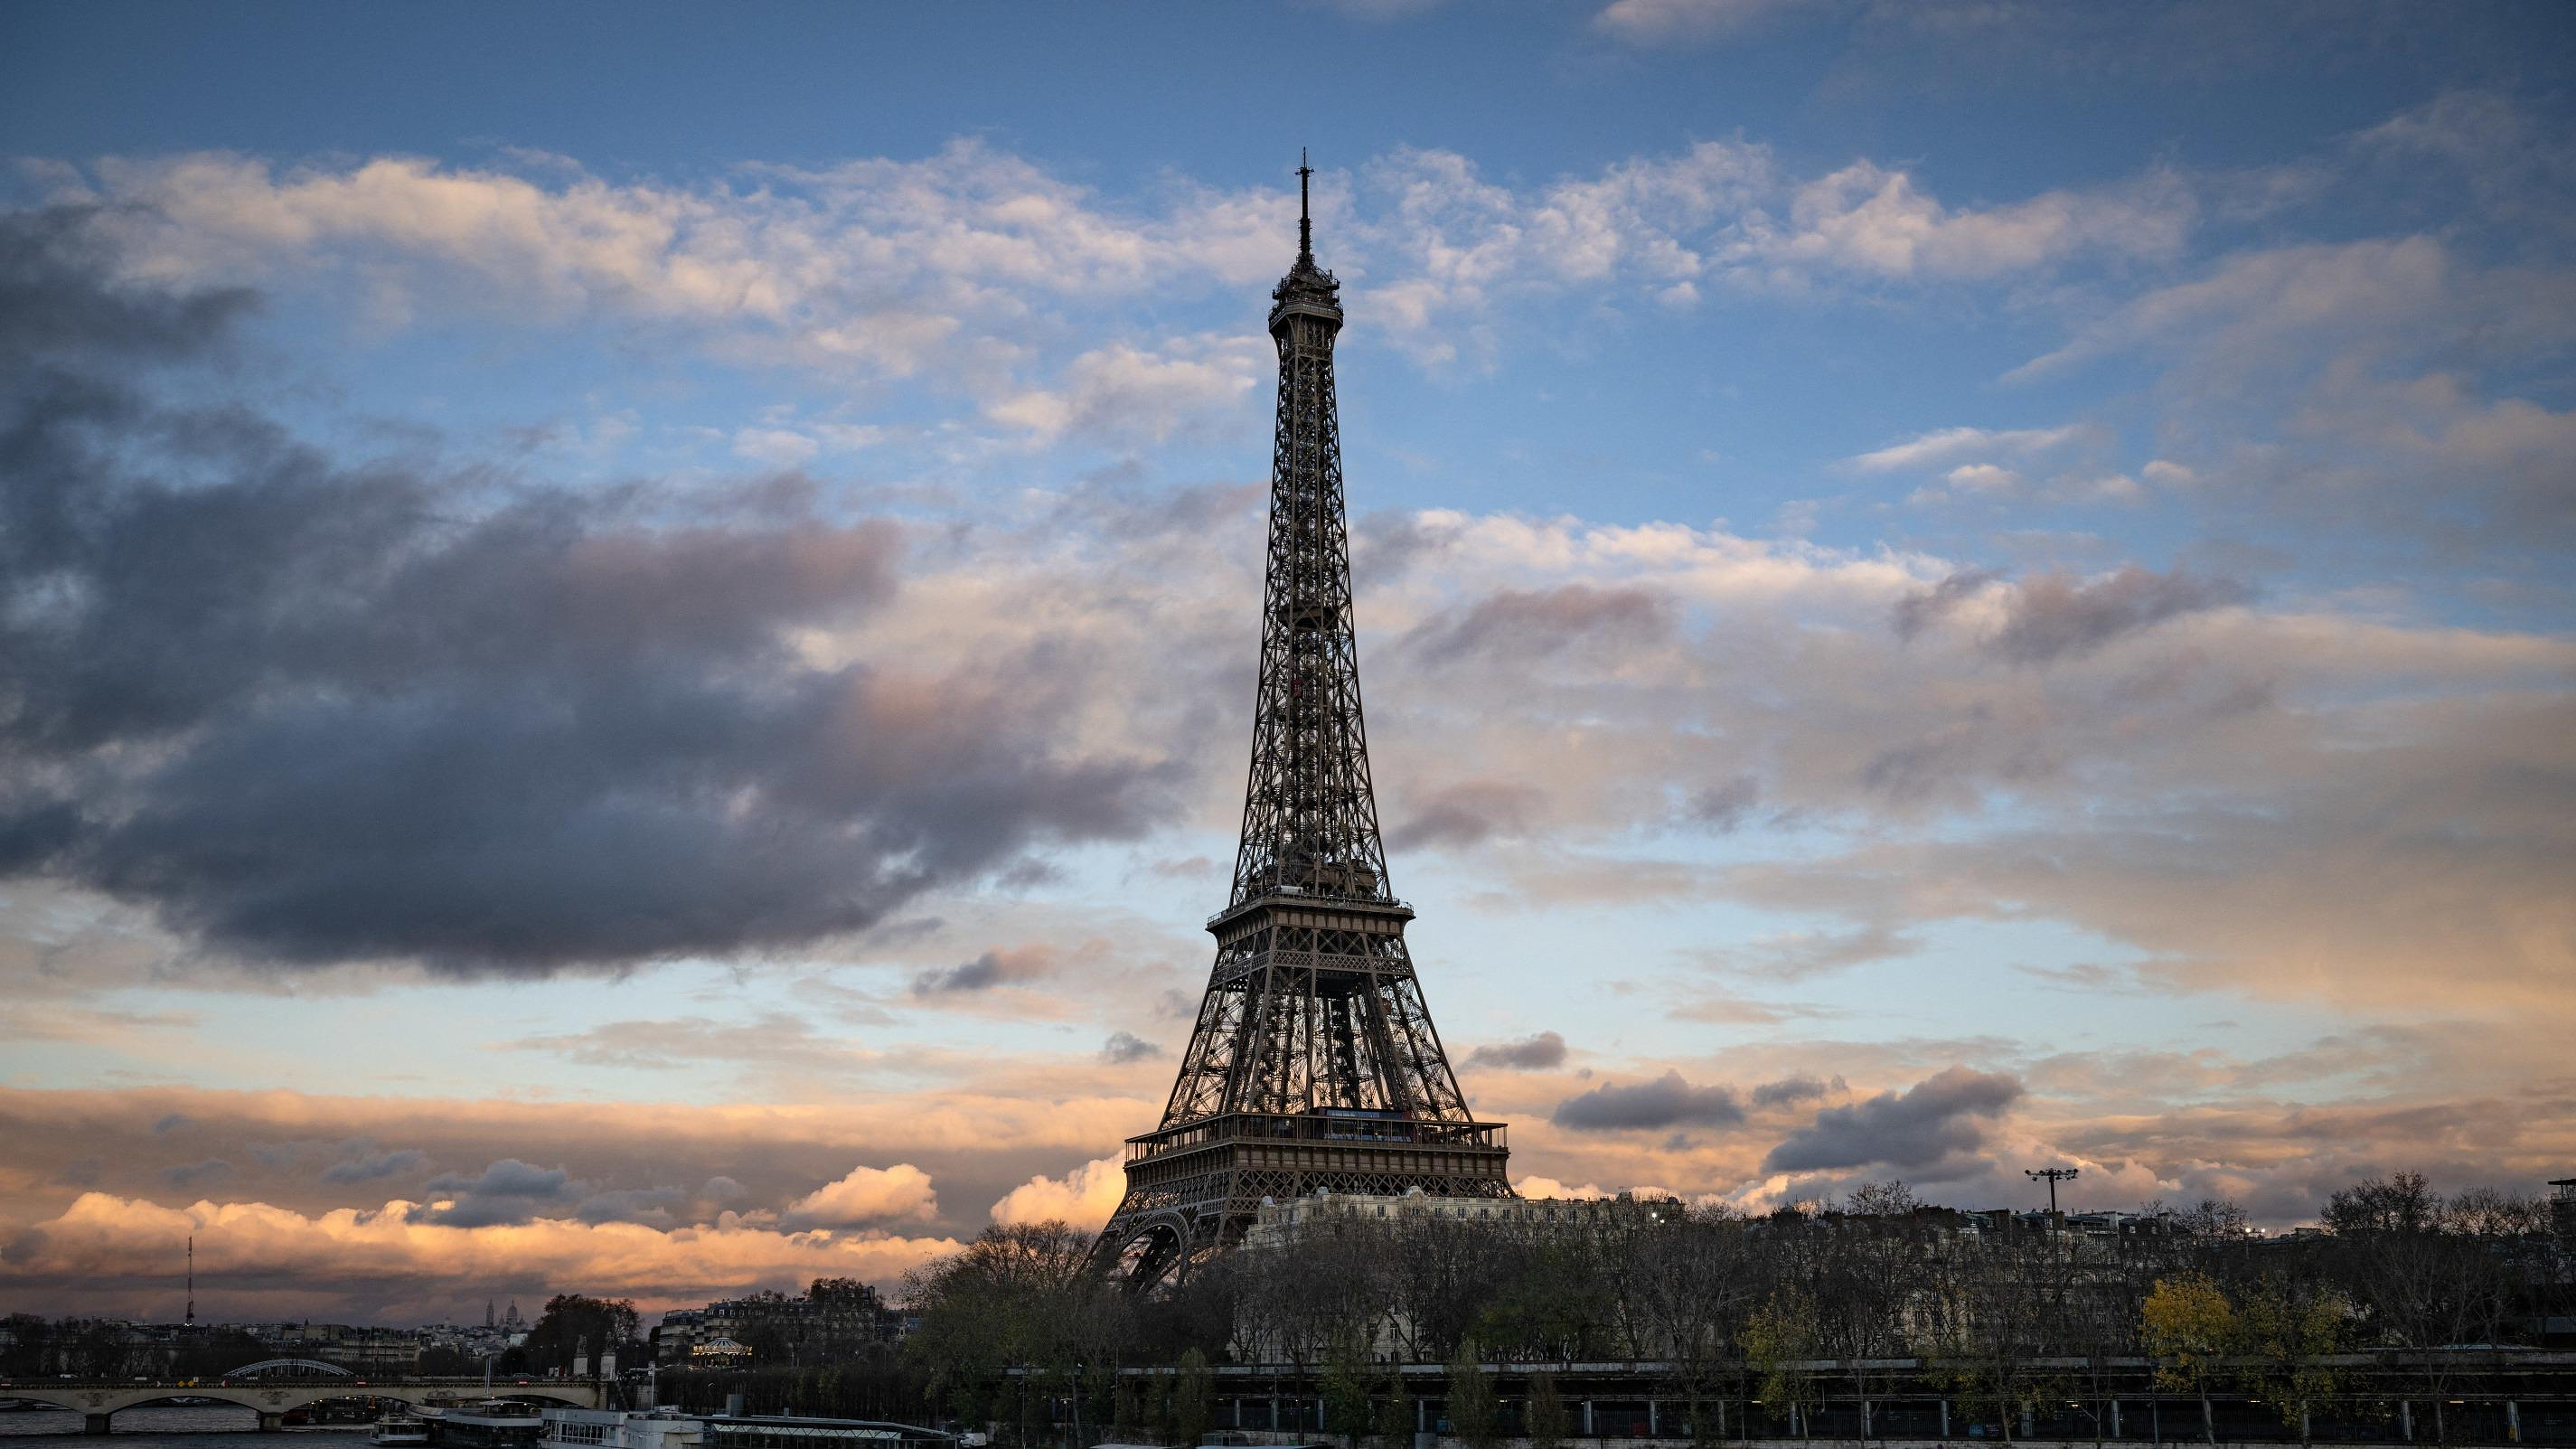 The Eiffel Tower in the grip of a renewable strike from February 19